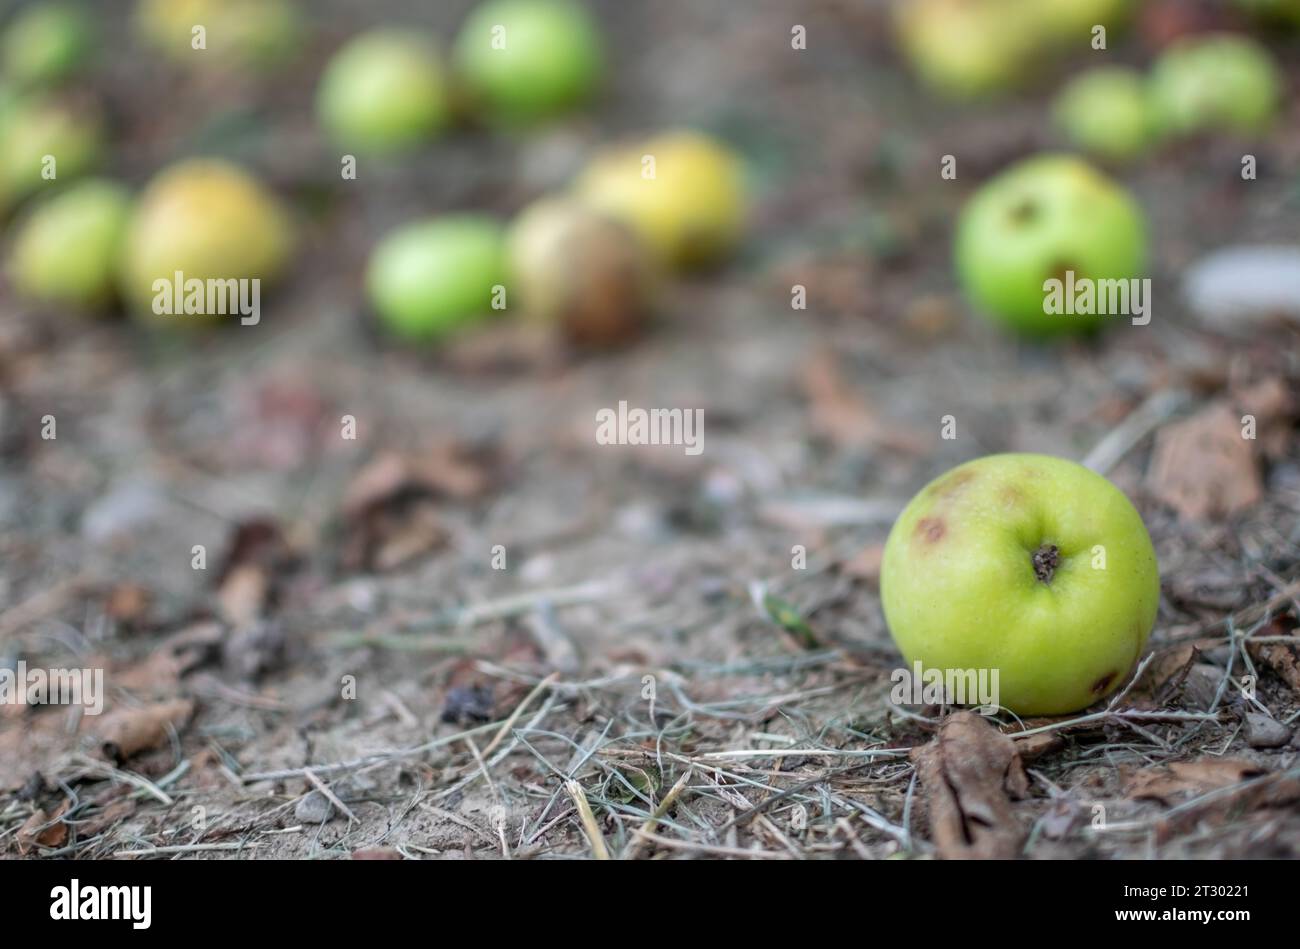 Close-up image of set of wild apples fallen in rustic field in seasonal changes Stock Photo